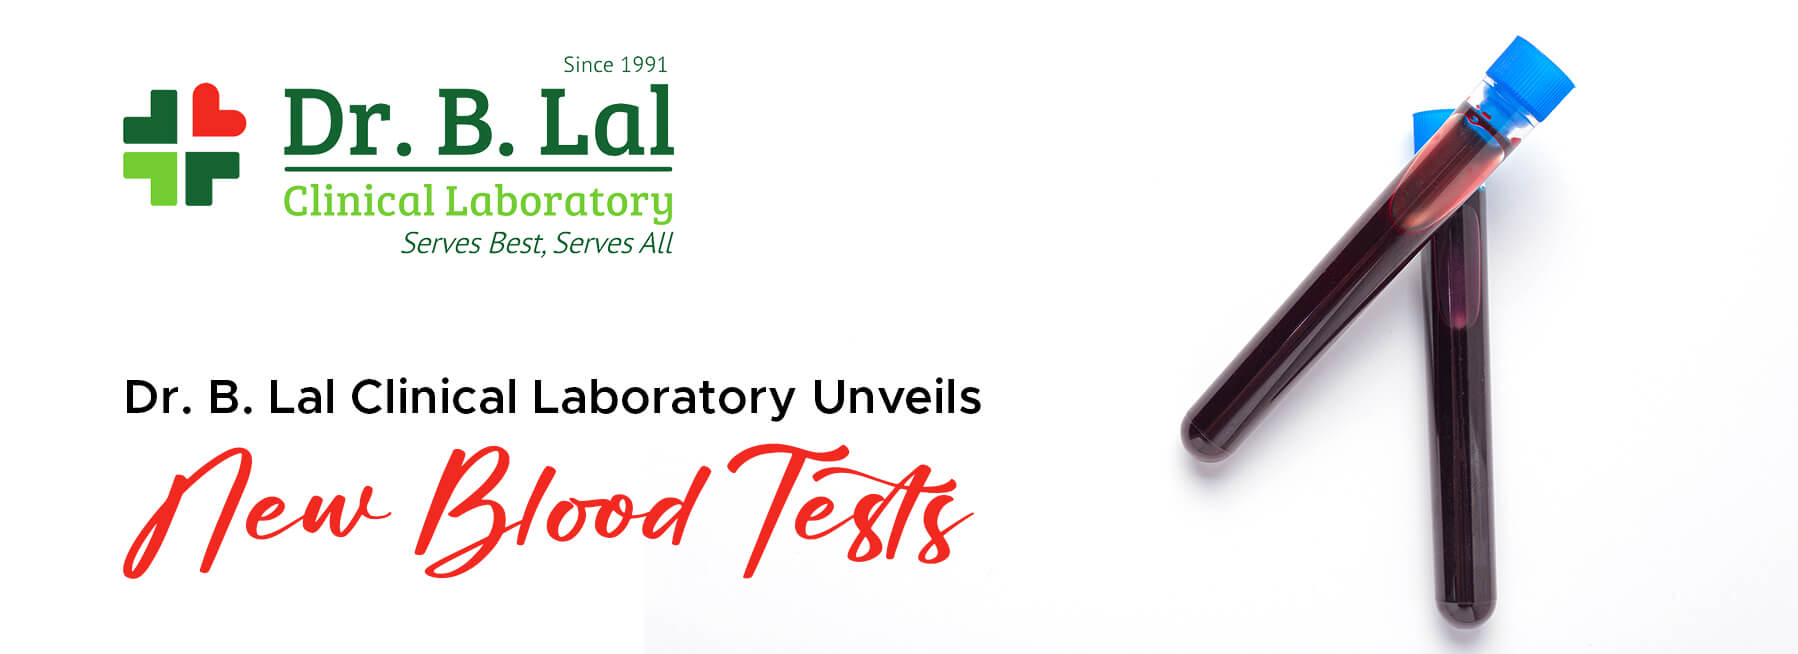 DR. B. LAL CLINICAL LABORATORY UNVEILS NEW BLOOD TESTS